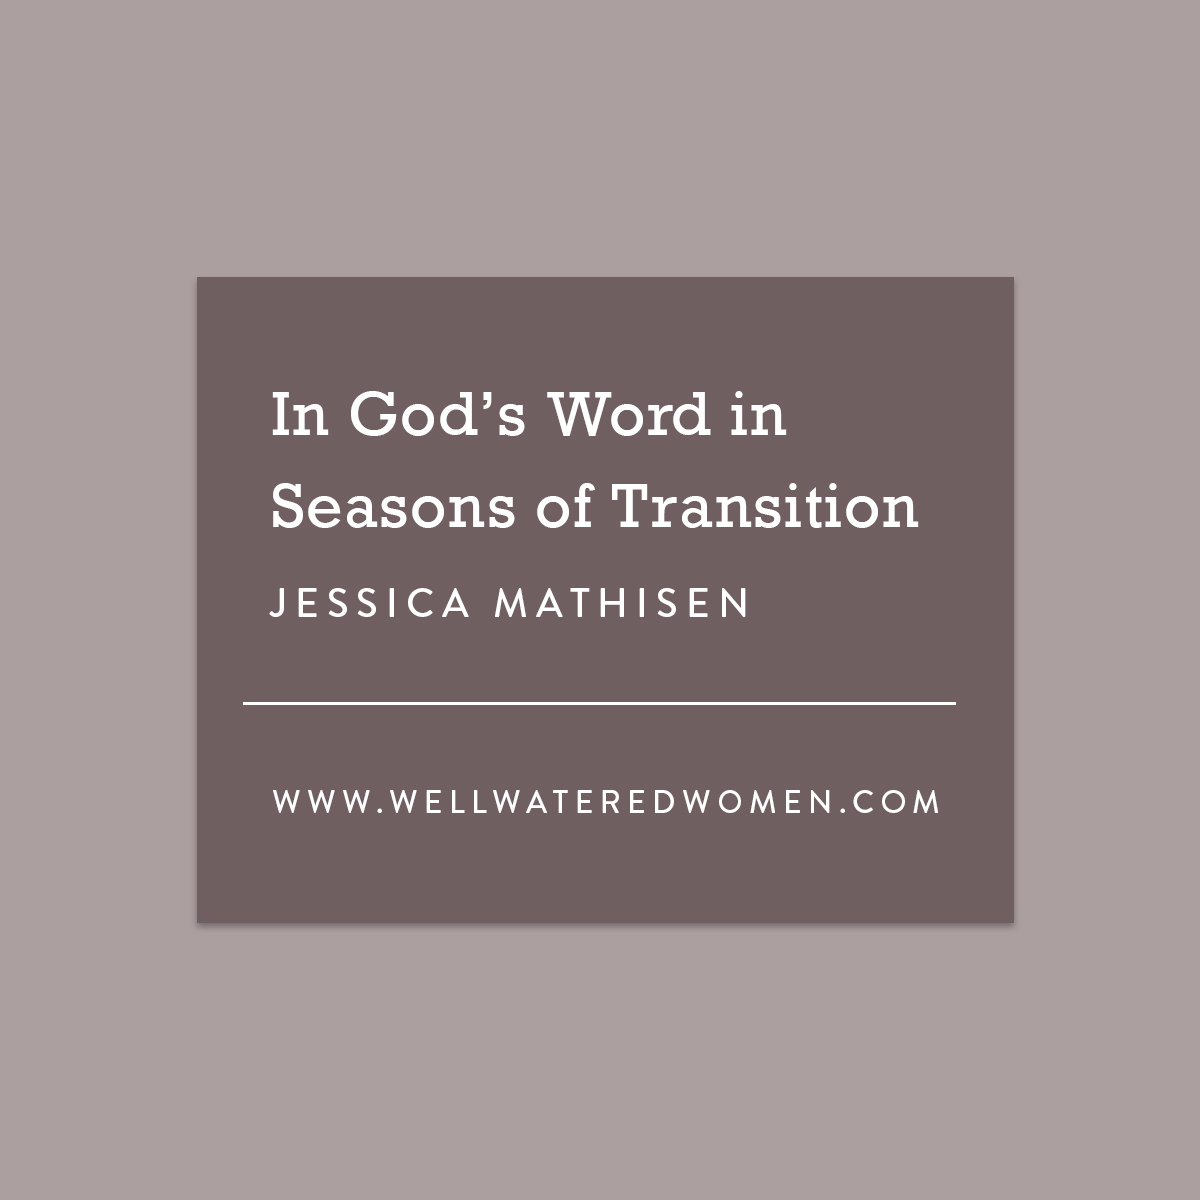 God's Word in Season of Transition - an Article from Well-Watered Women